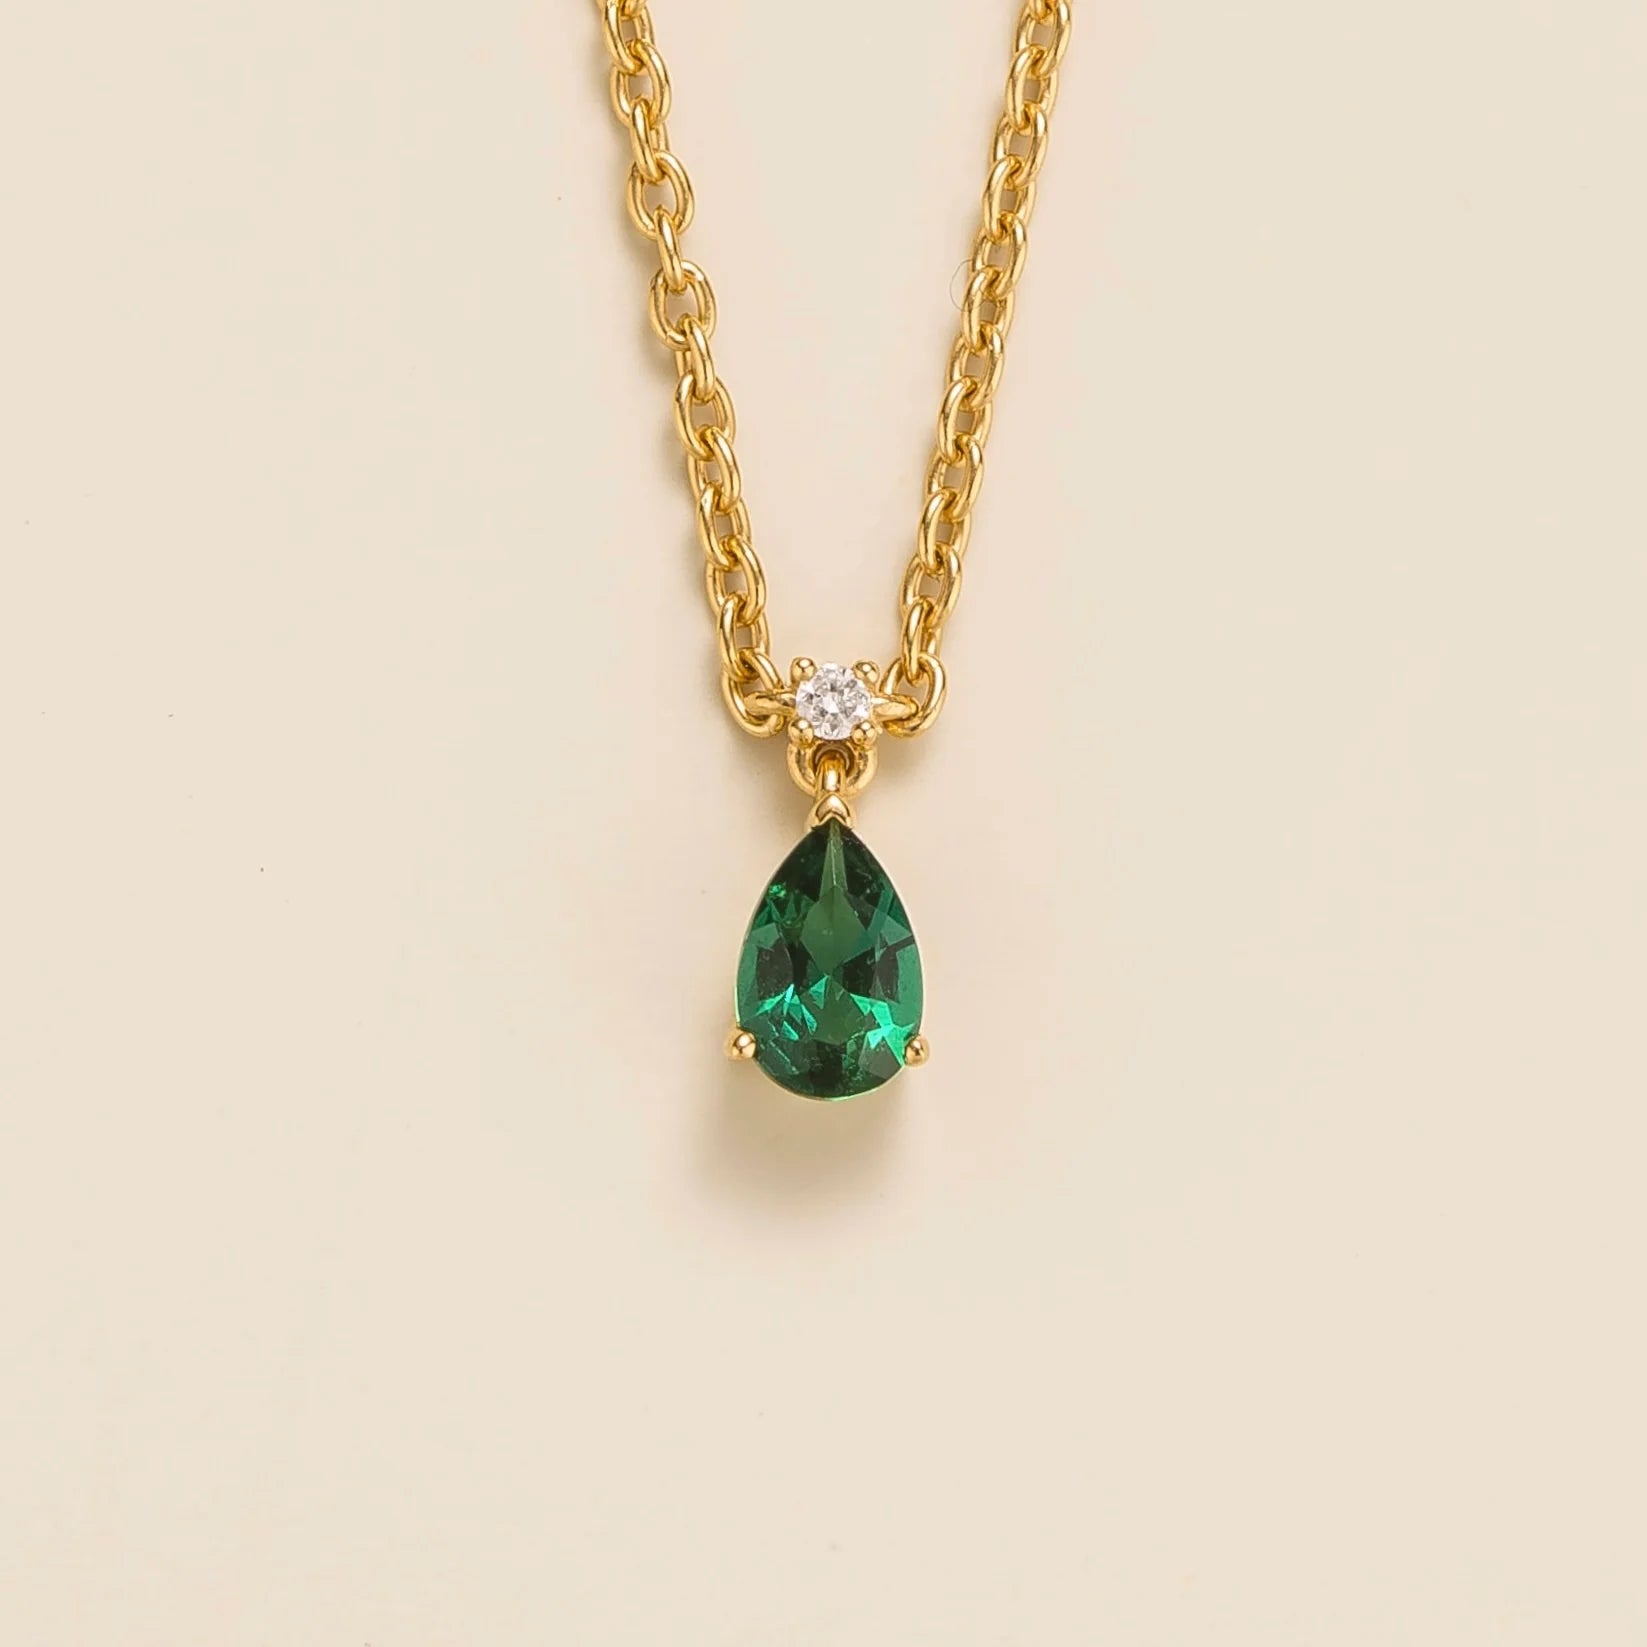 Ori small pendant necklace in Emerald and Diamond set in Gold Best London Jewellery Store